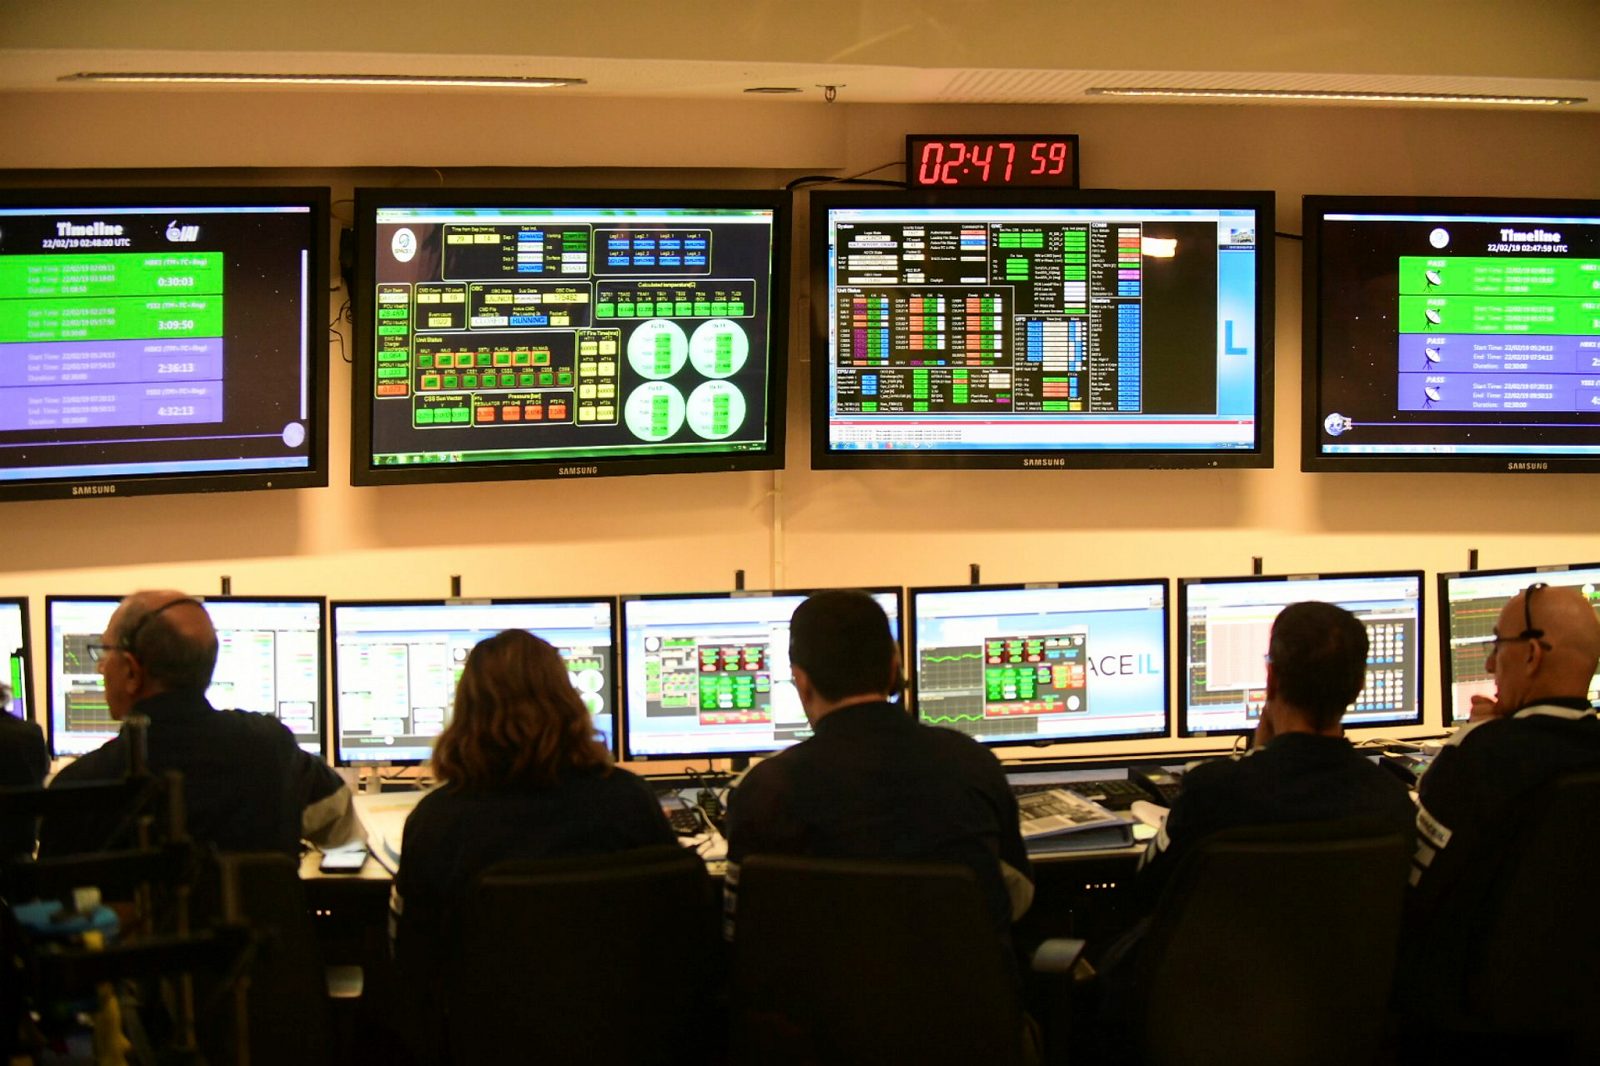 SpaceIL team members sitting in the control room before launching of the Israeli spacecraft, at the Israel Aerospace Industries in Yahud on February 22, 2019. Photo by Tomer Neuberg/Flash90